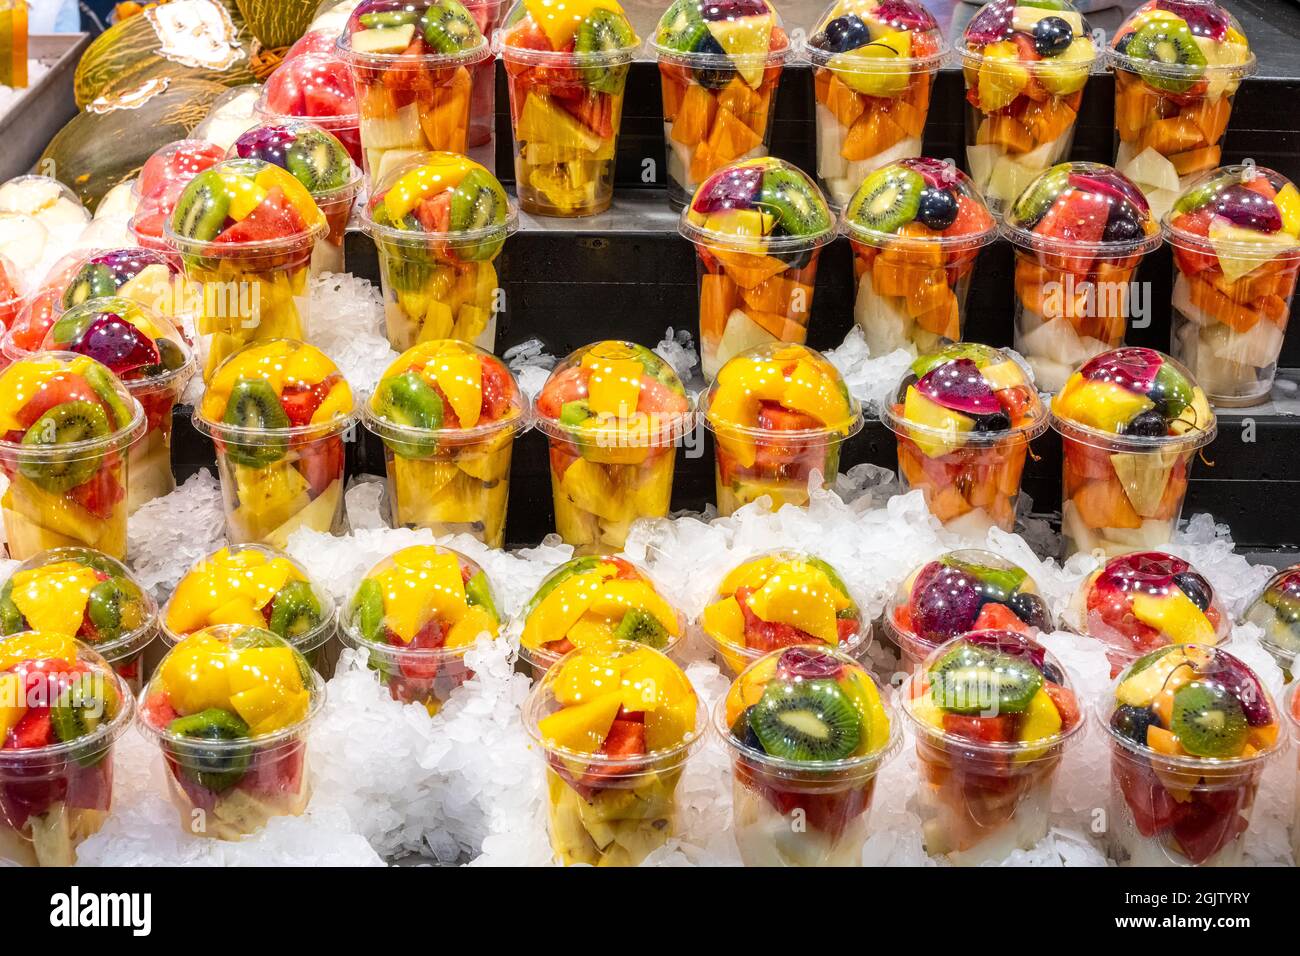 A variety of fruit salads at a market in Barcelona, Spain Stock Photo